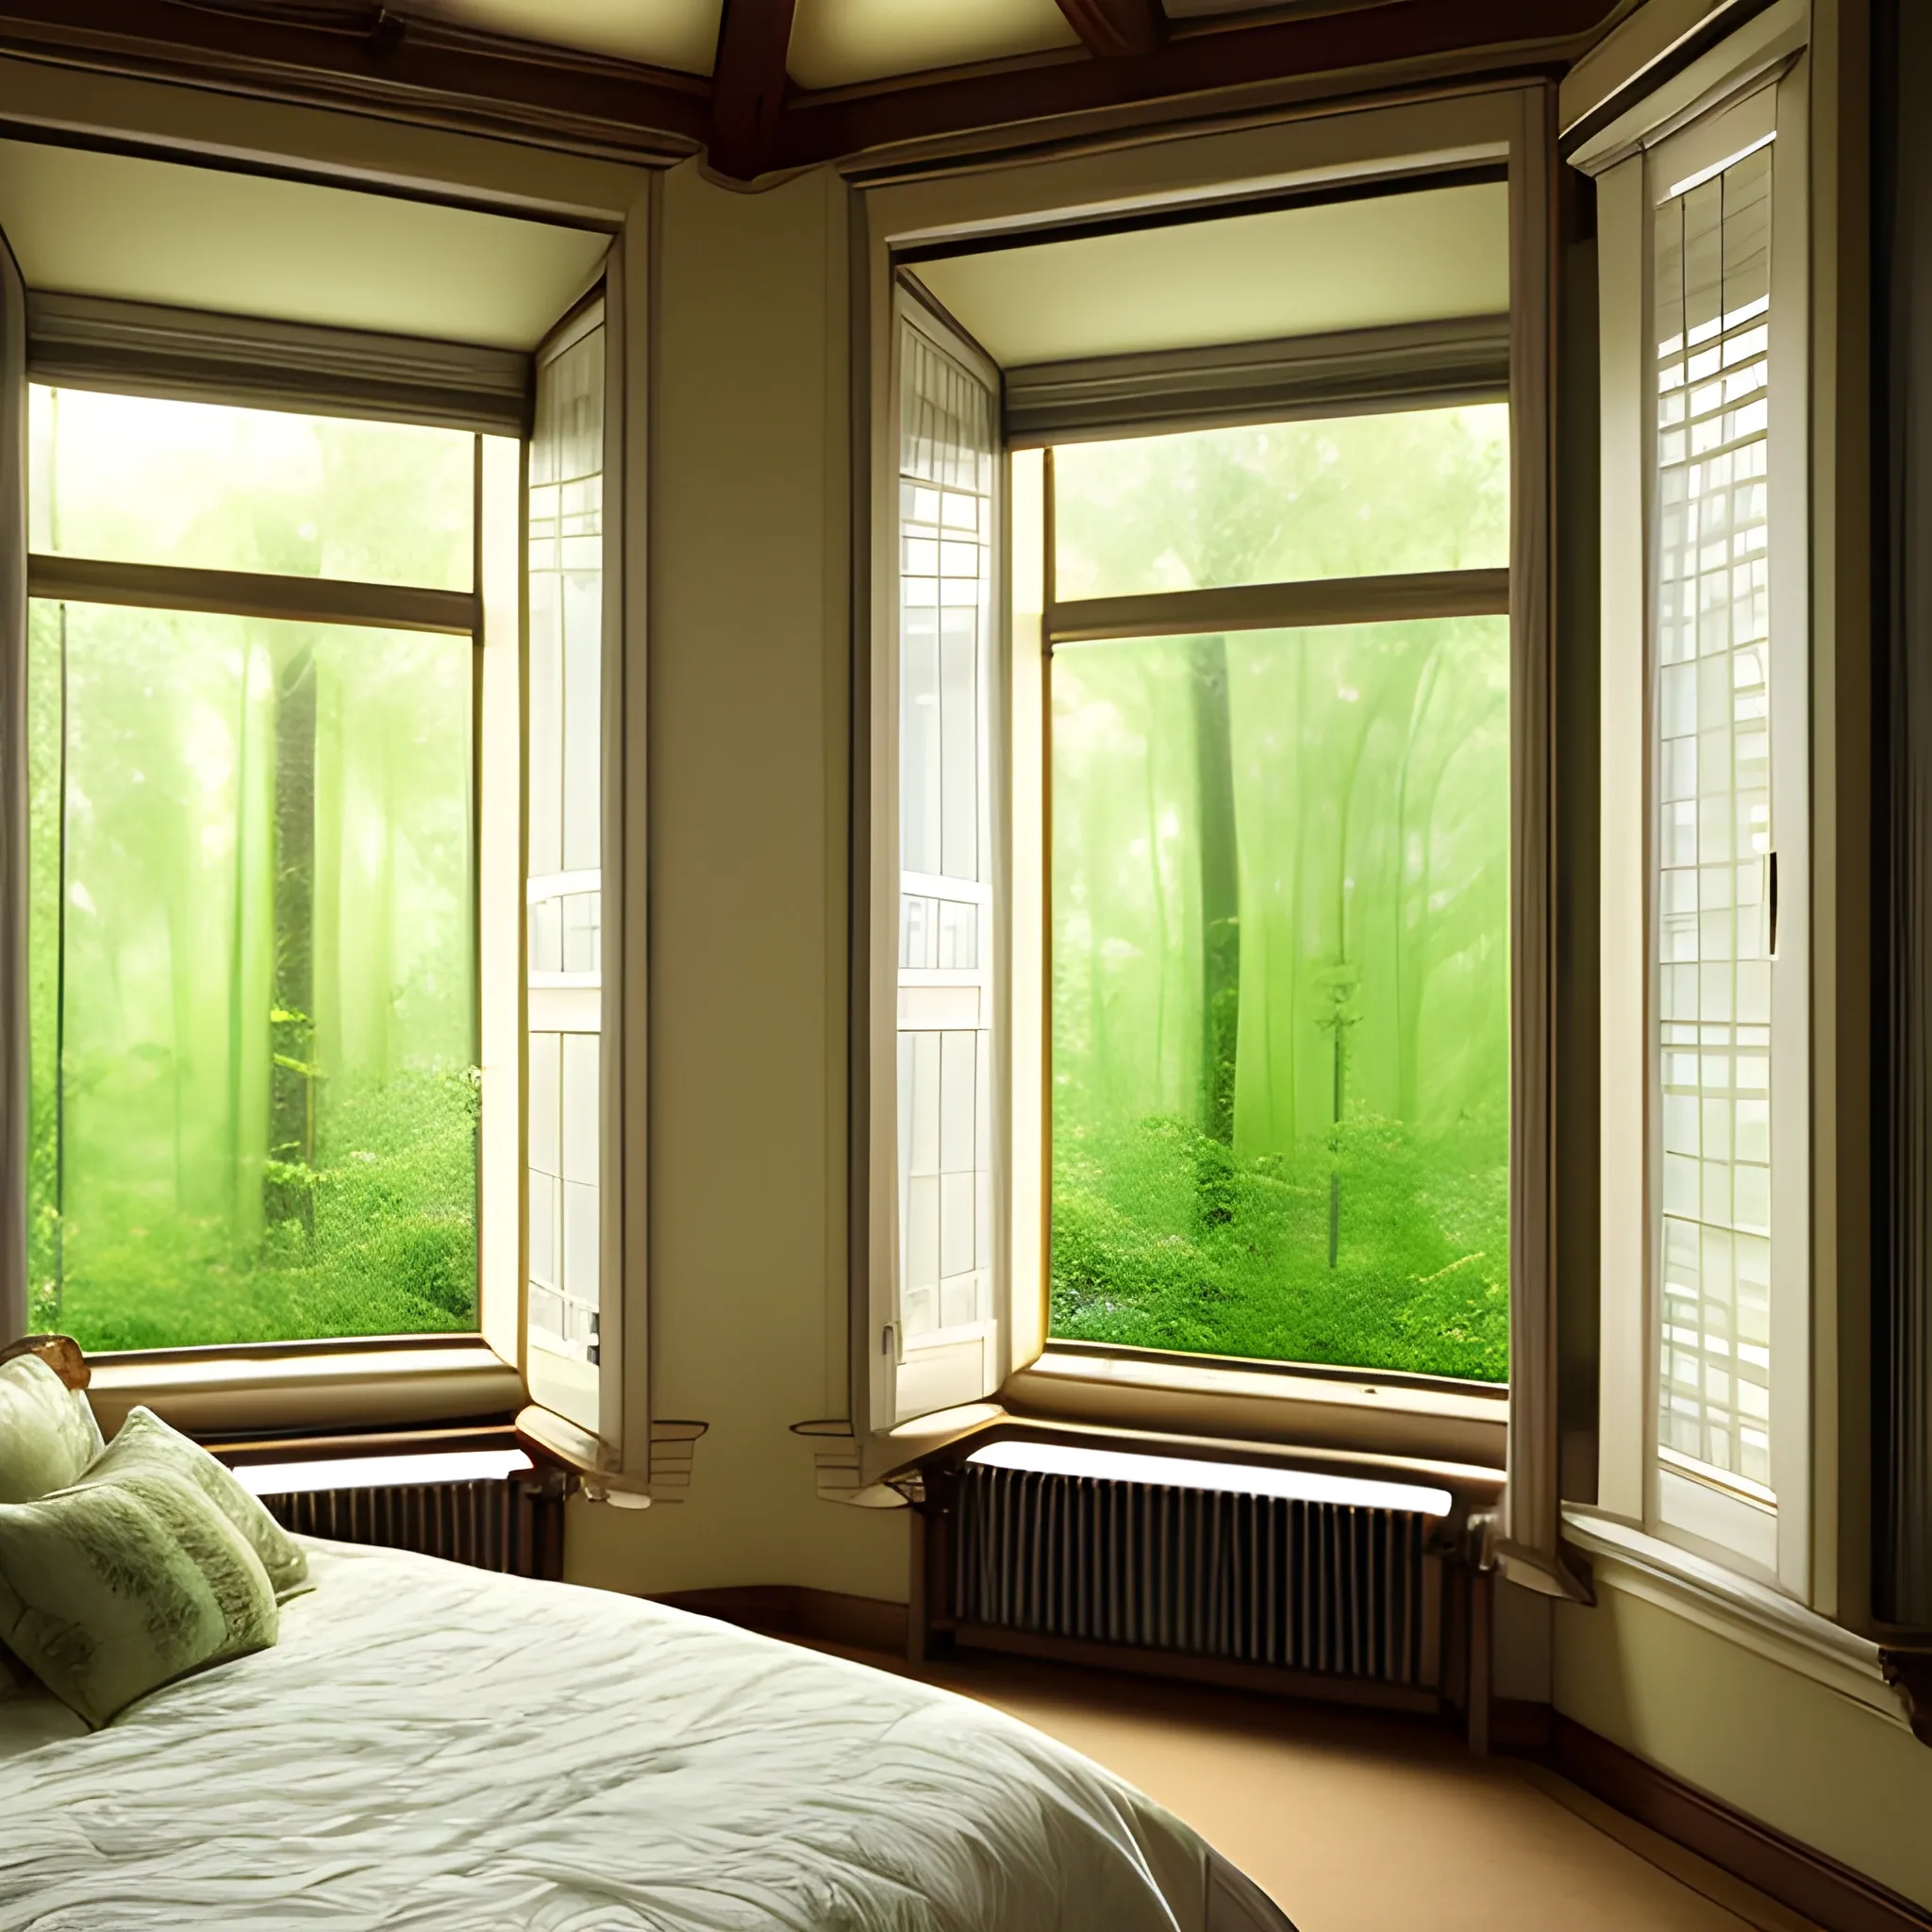 elegant and cozy bedroom with two-story windows, sunshine streaming in through the windows, view onto a lush forest, professional photography, Water Color, Trippy